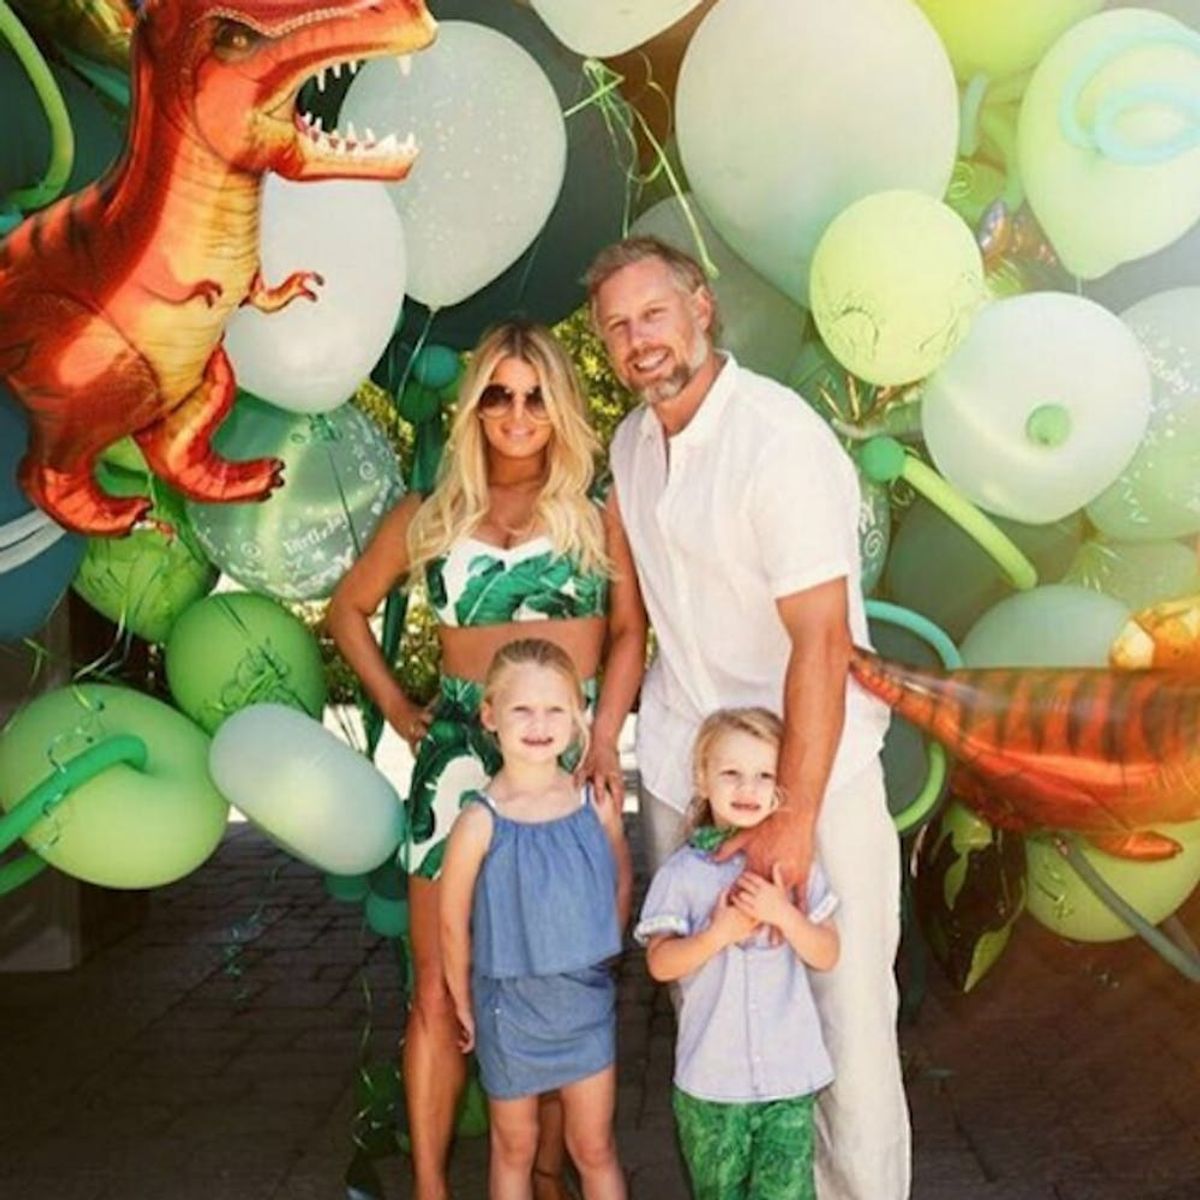 Morning Buzz! See the Epic Dinosaur Birthday Jessica Simpson Threw for Her Son + More